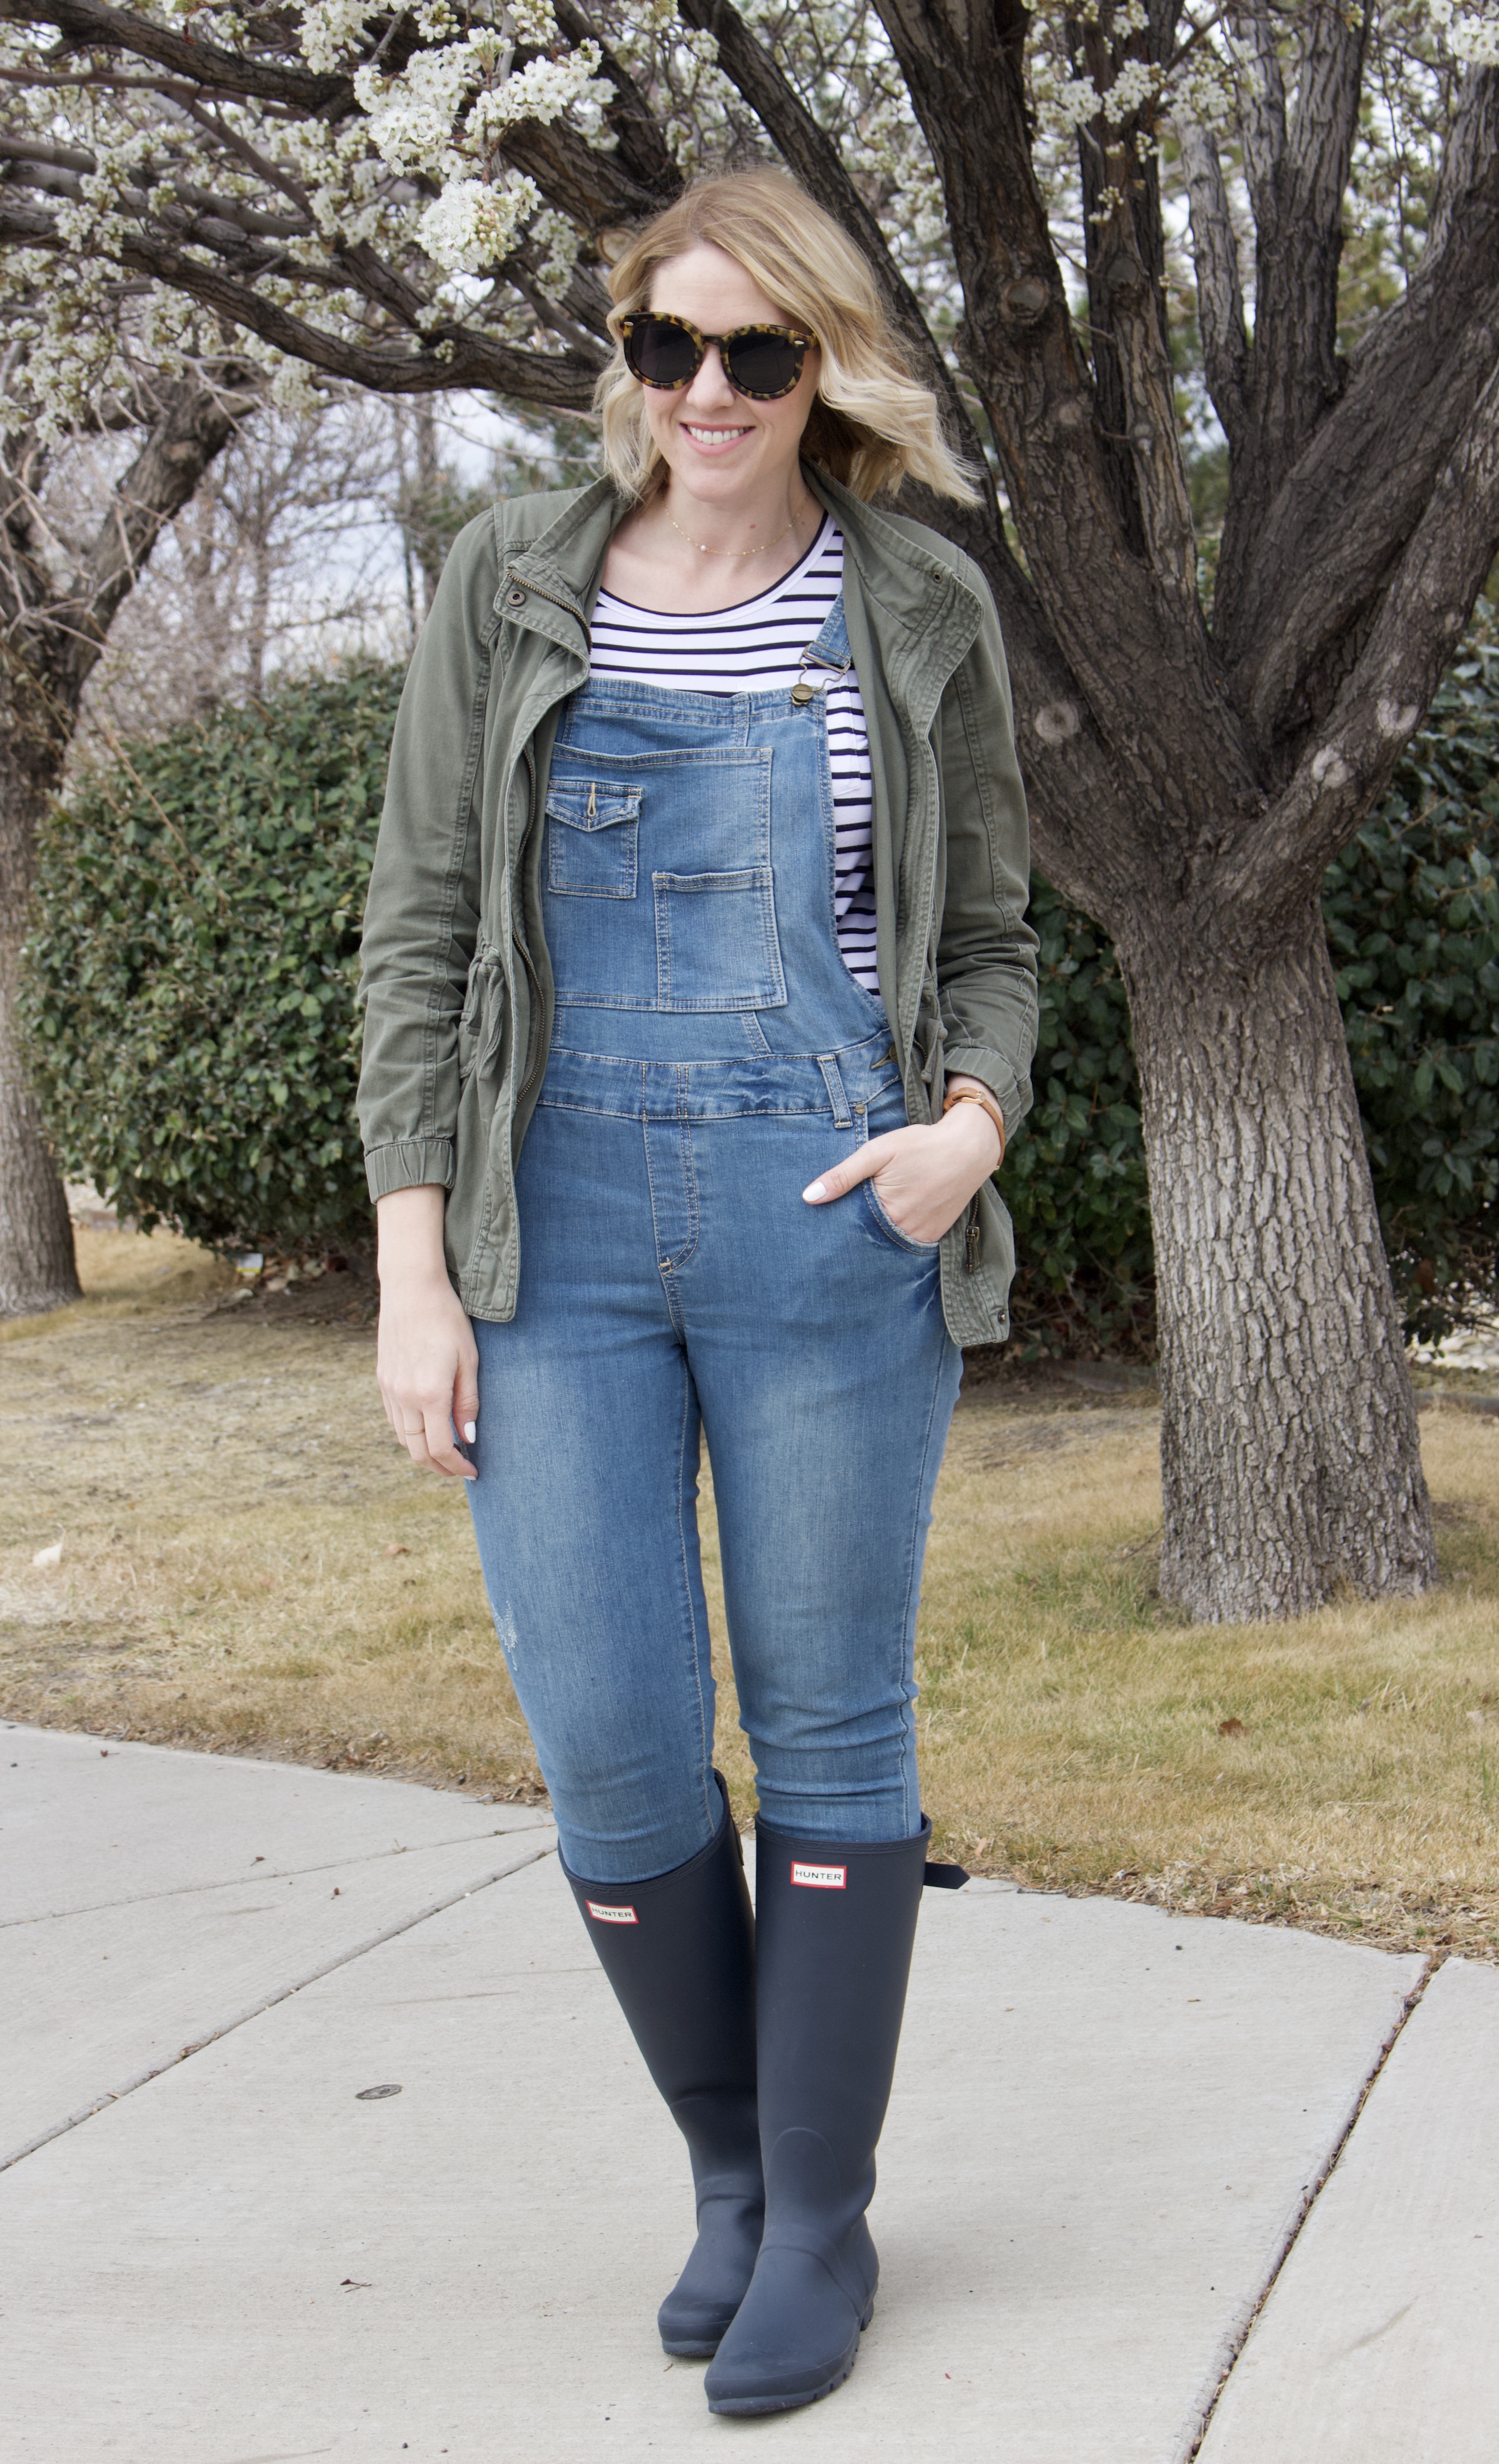 cute overalls outfit with hunter boots #momstyle #springstyle #overallsoutfit